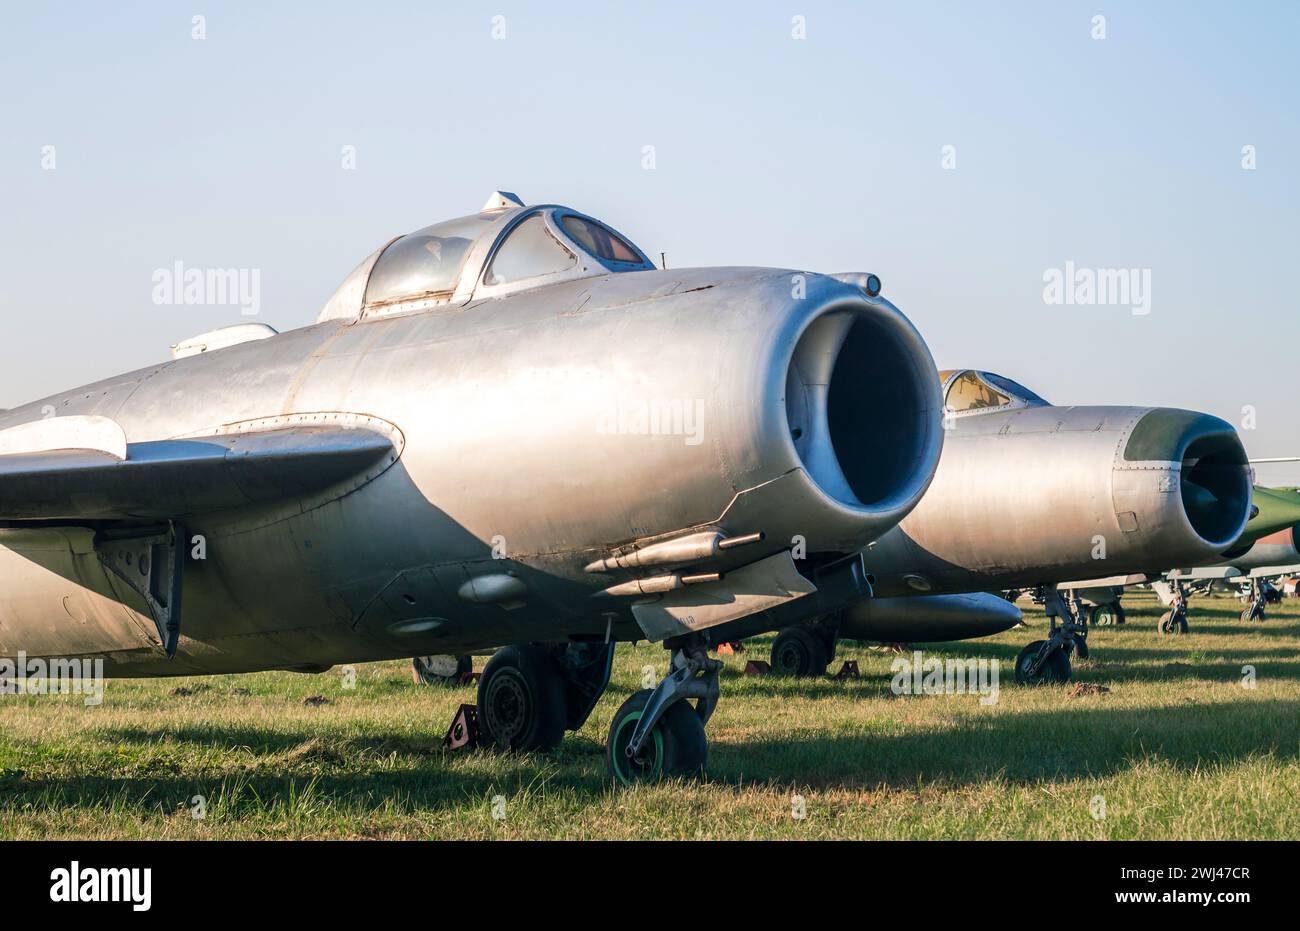 Old soviet army military fighter aircraft at the airport Stock Photo